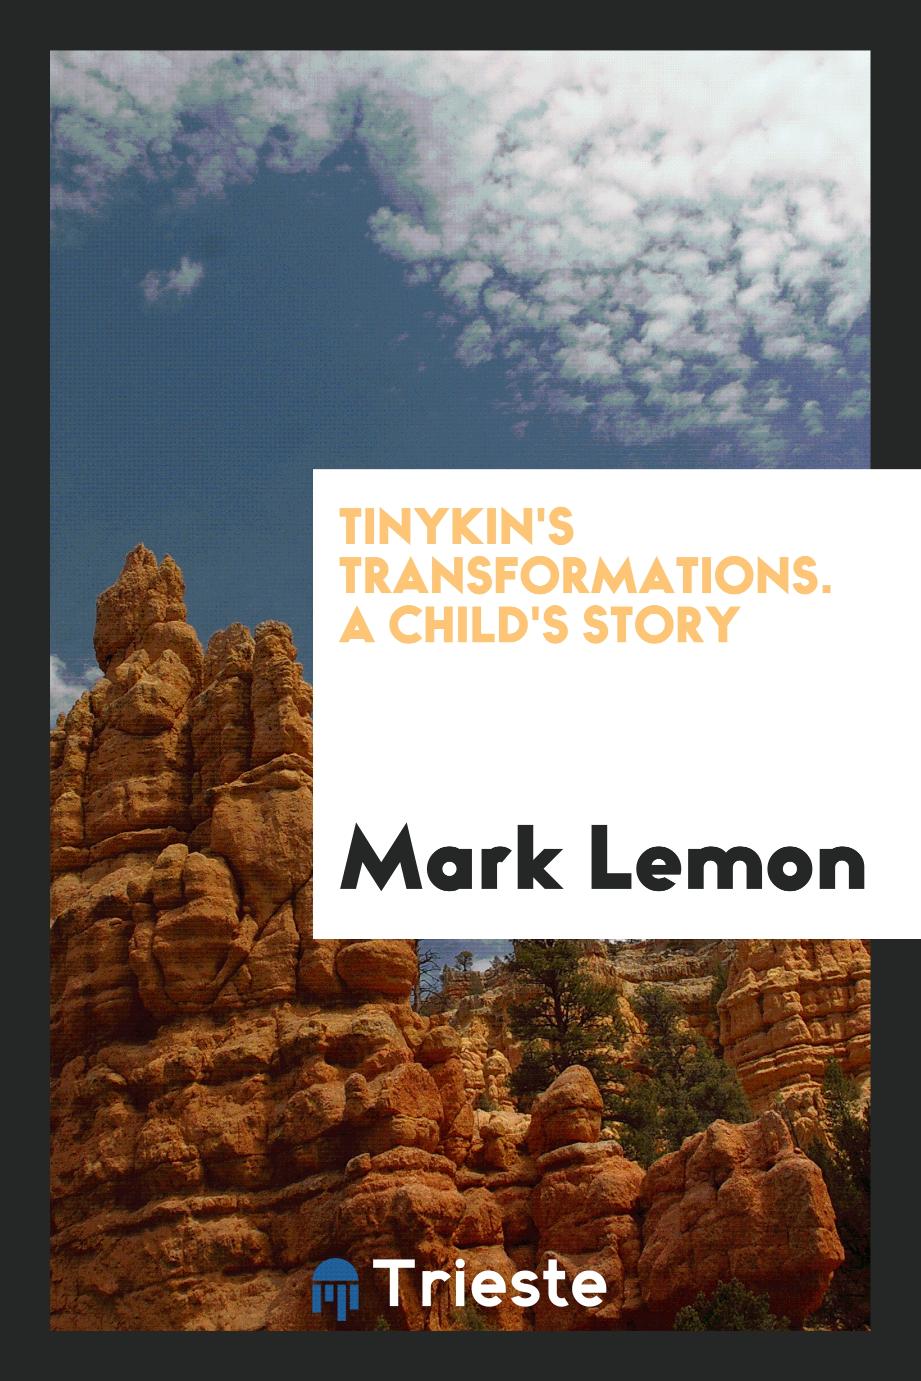 Tinykin's transformations. A child's story